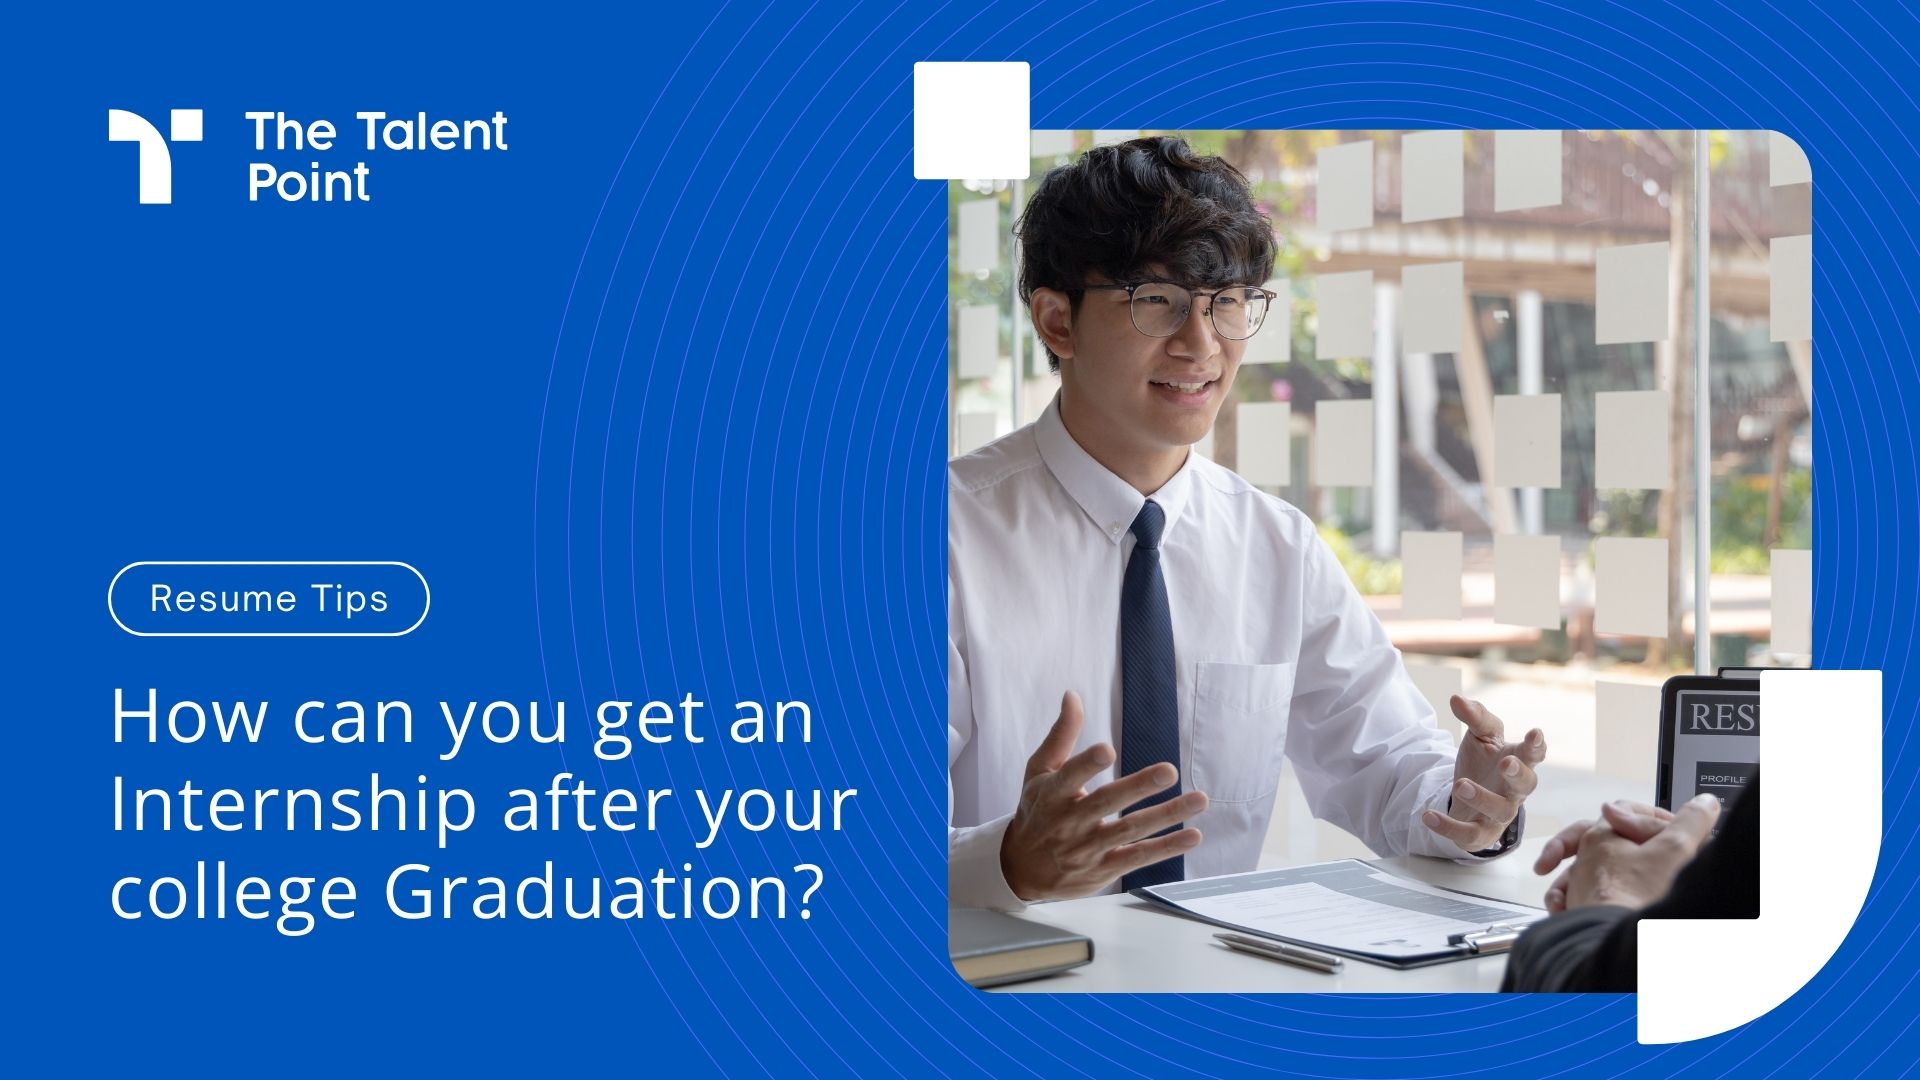 How can you get an Internship after your college Graduation?